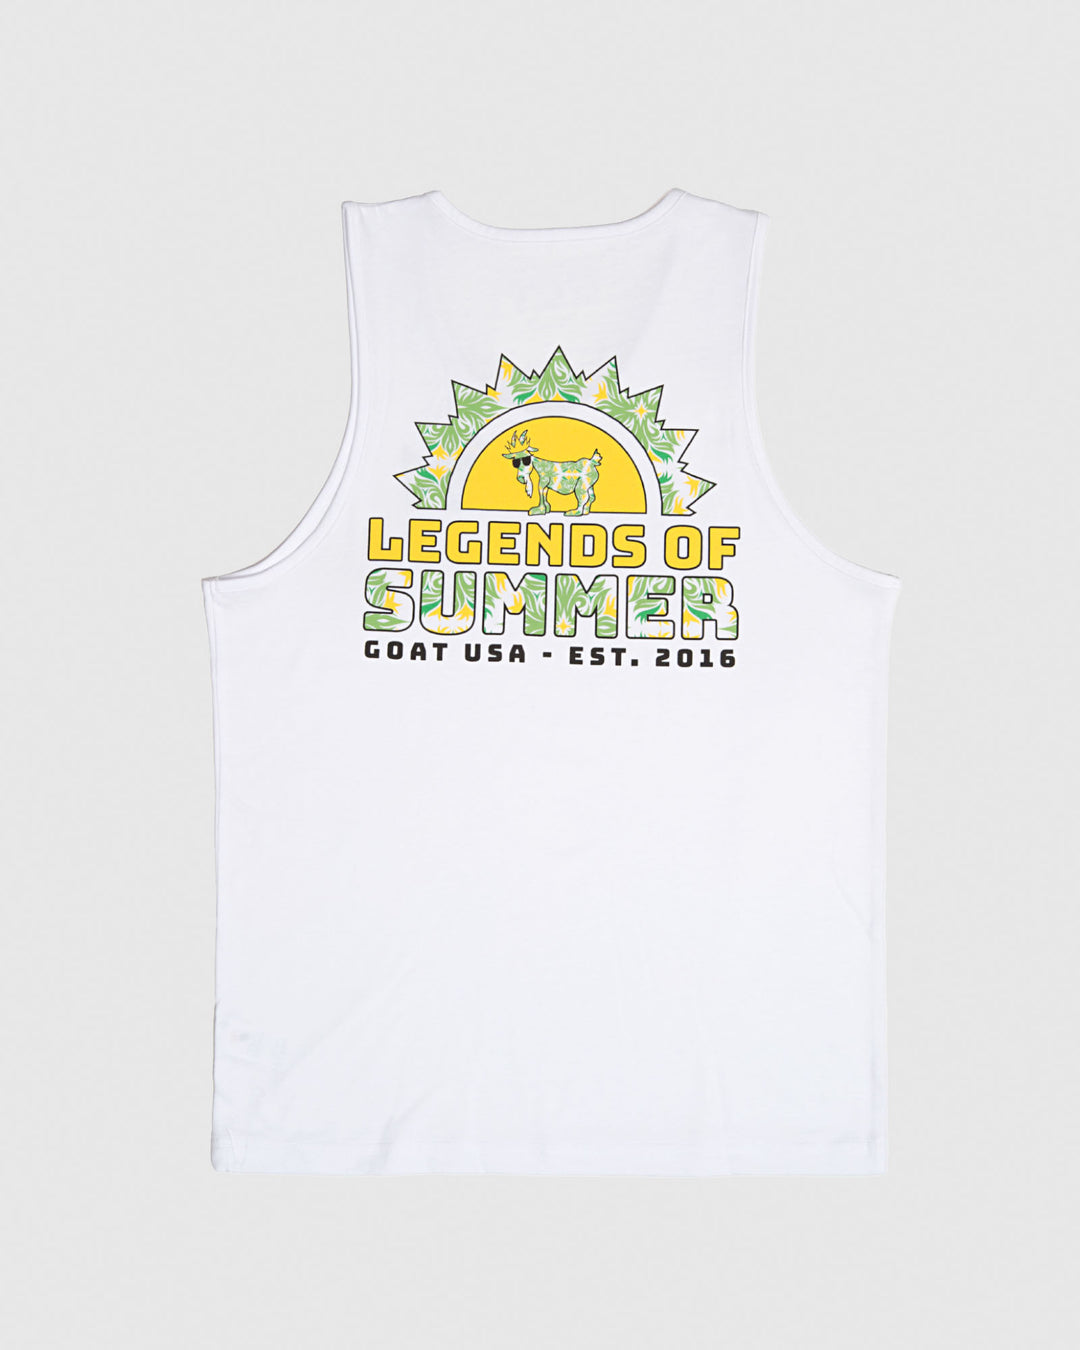 White tank top with yellow/green floral design that reads "Legends of Summer"